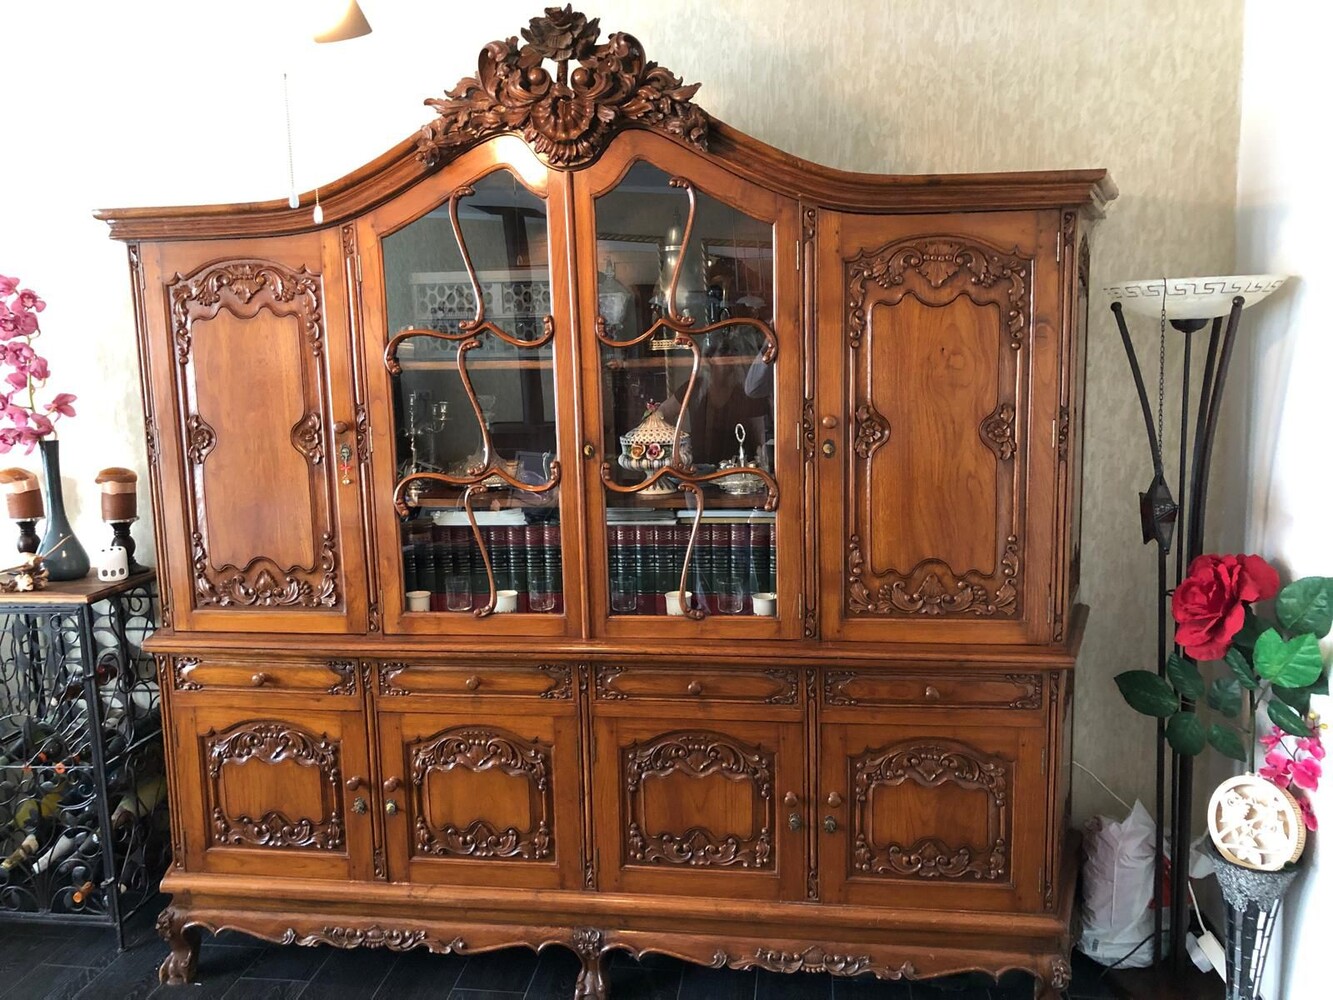 Grandeur Preserved: French Chip and Dale Cabinet with Exquisite Heavy Carvings